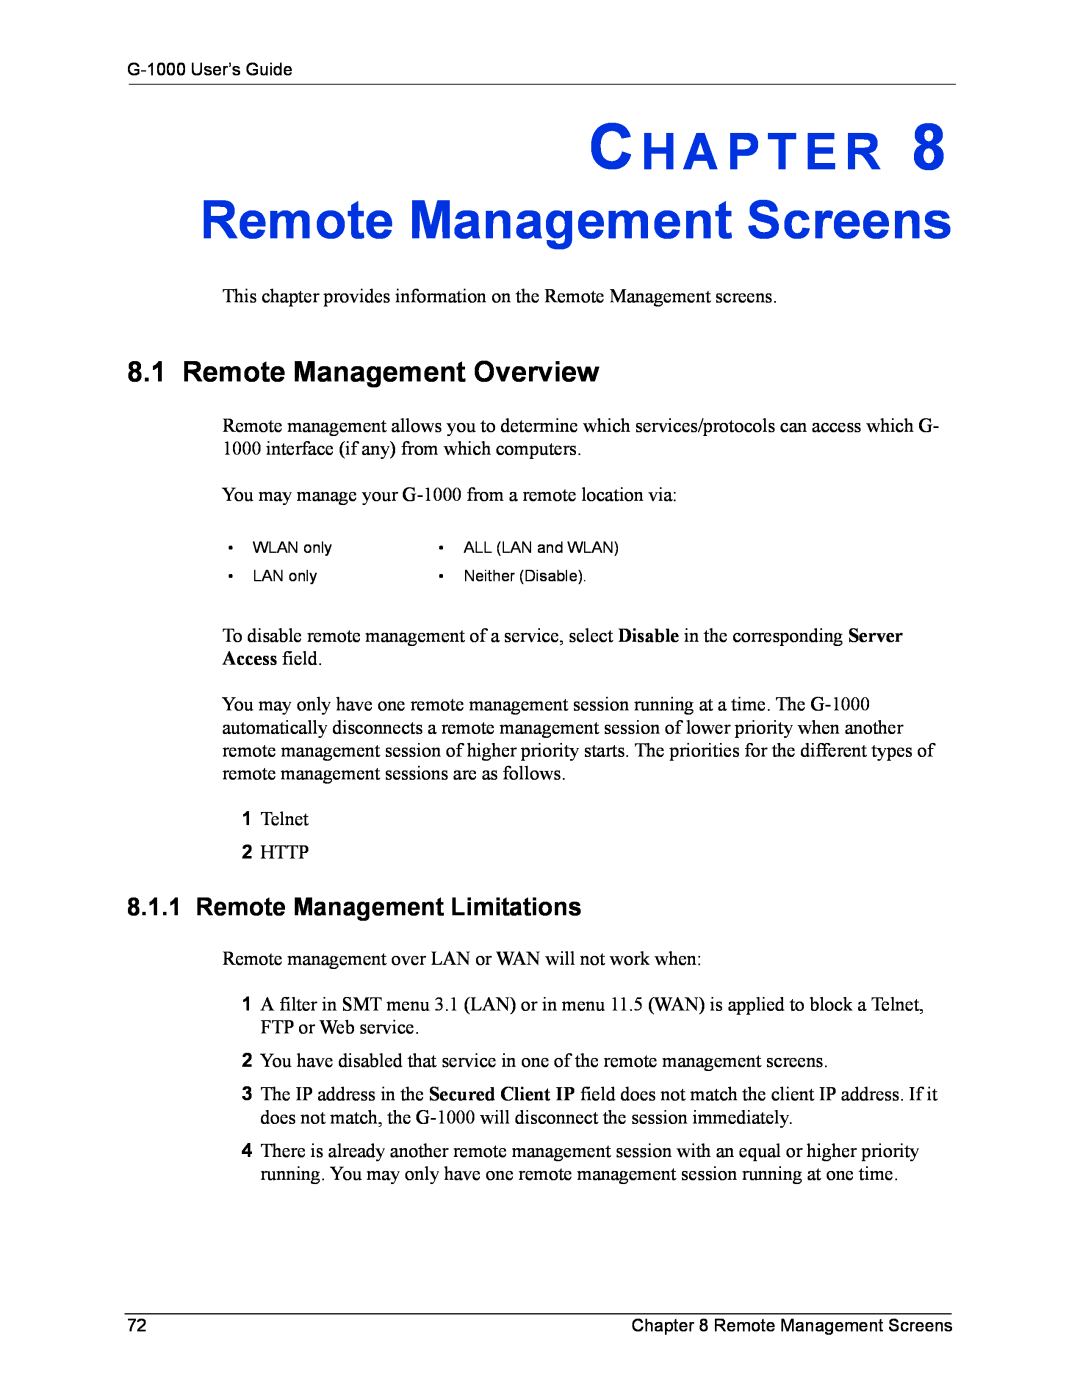 ZyXEL Communications G-1000 manual Remote Management Screens, Remote Management Overview, Remote Management Limitations 